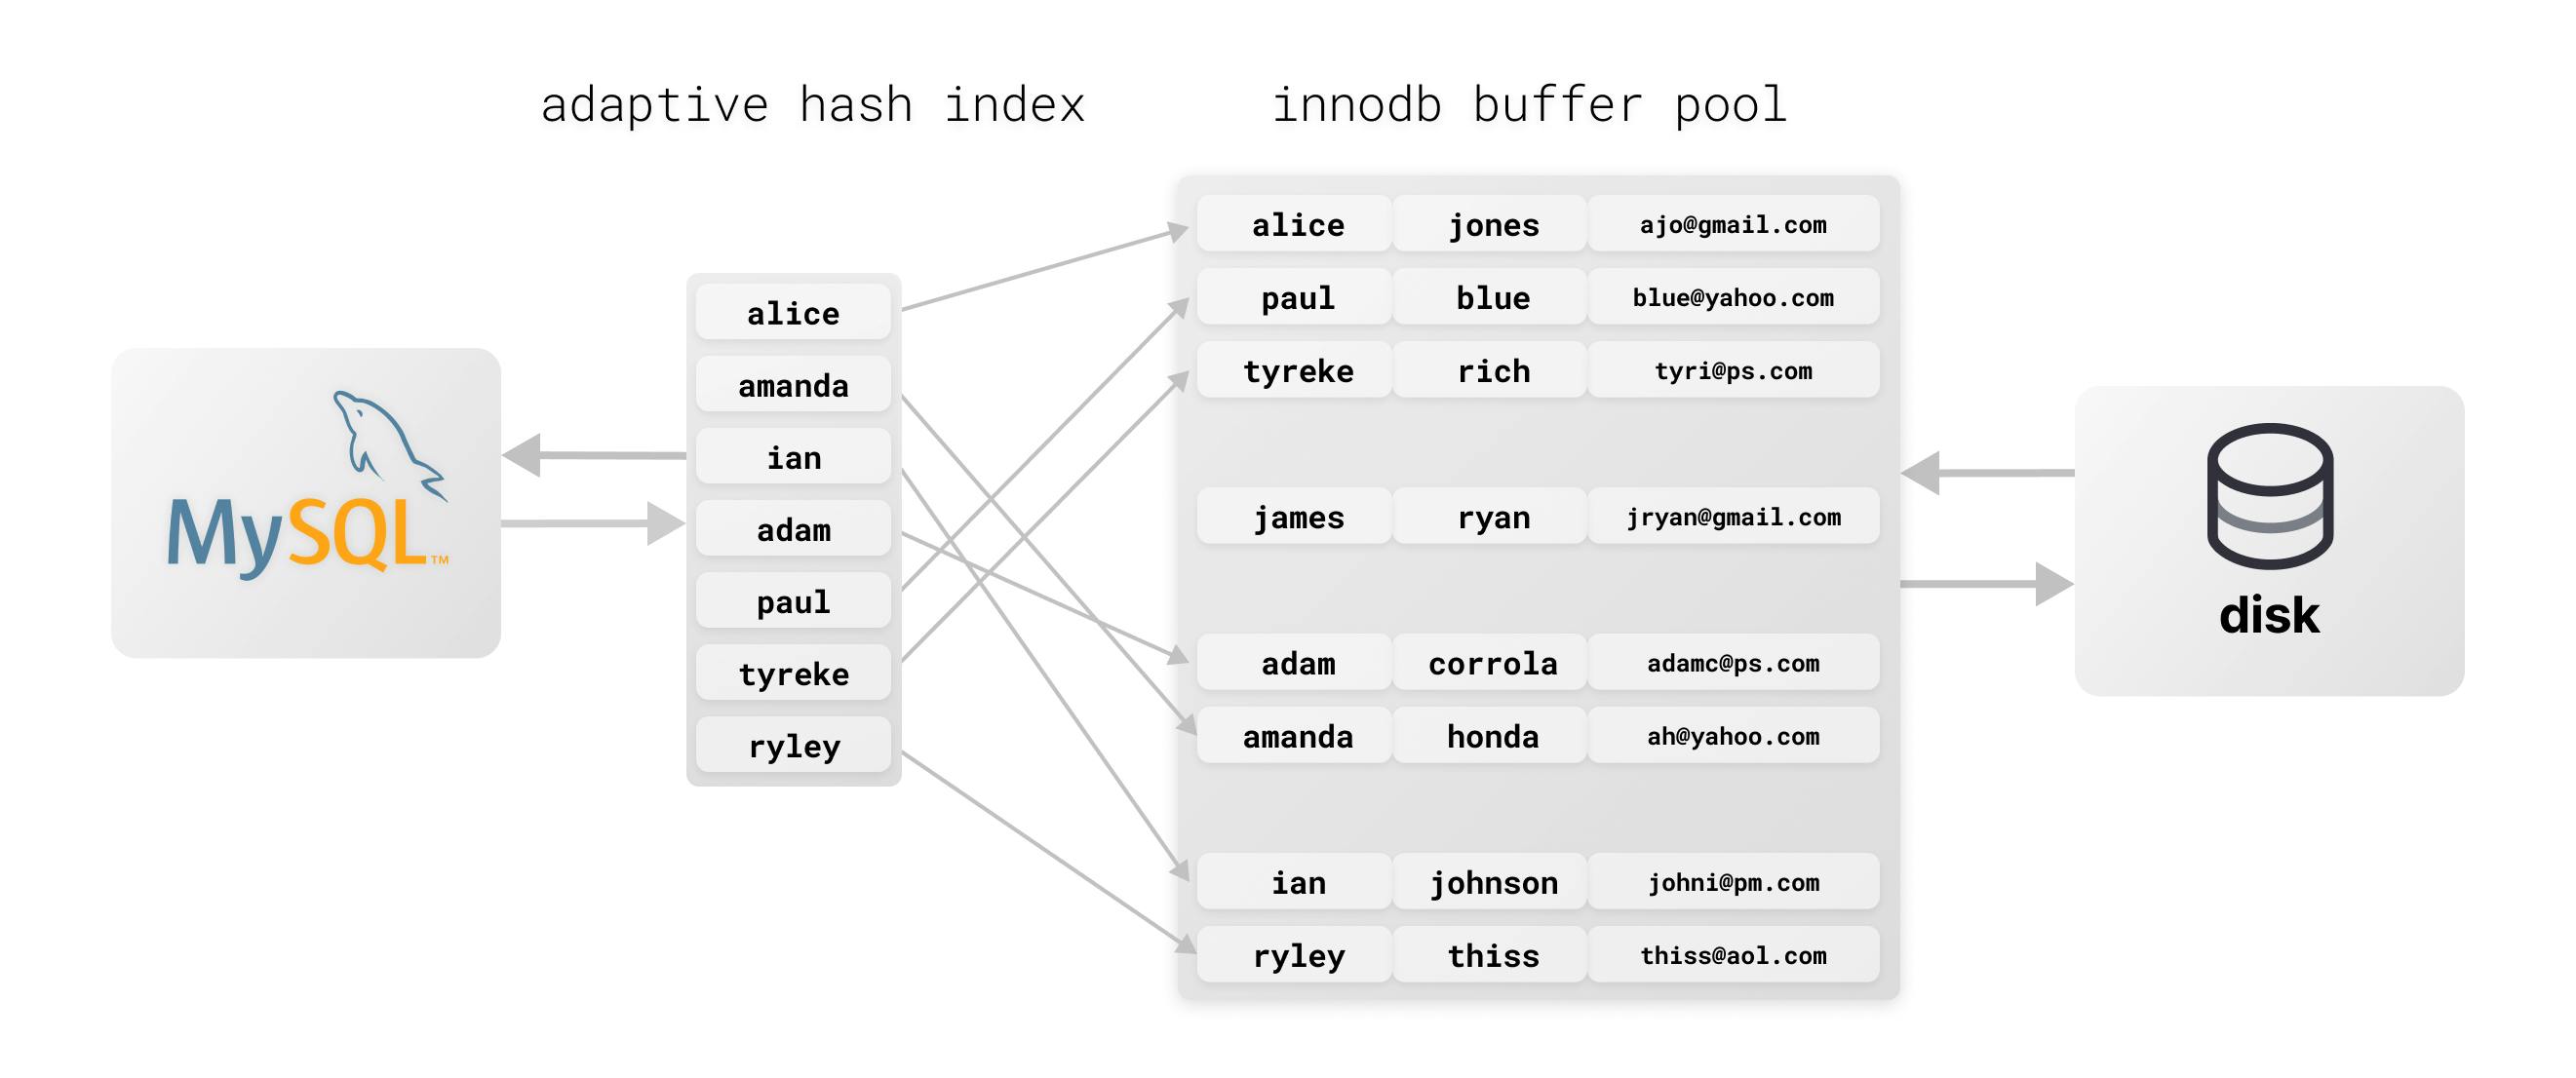 How the adaptive hash index works with the InnoDB buffer pool